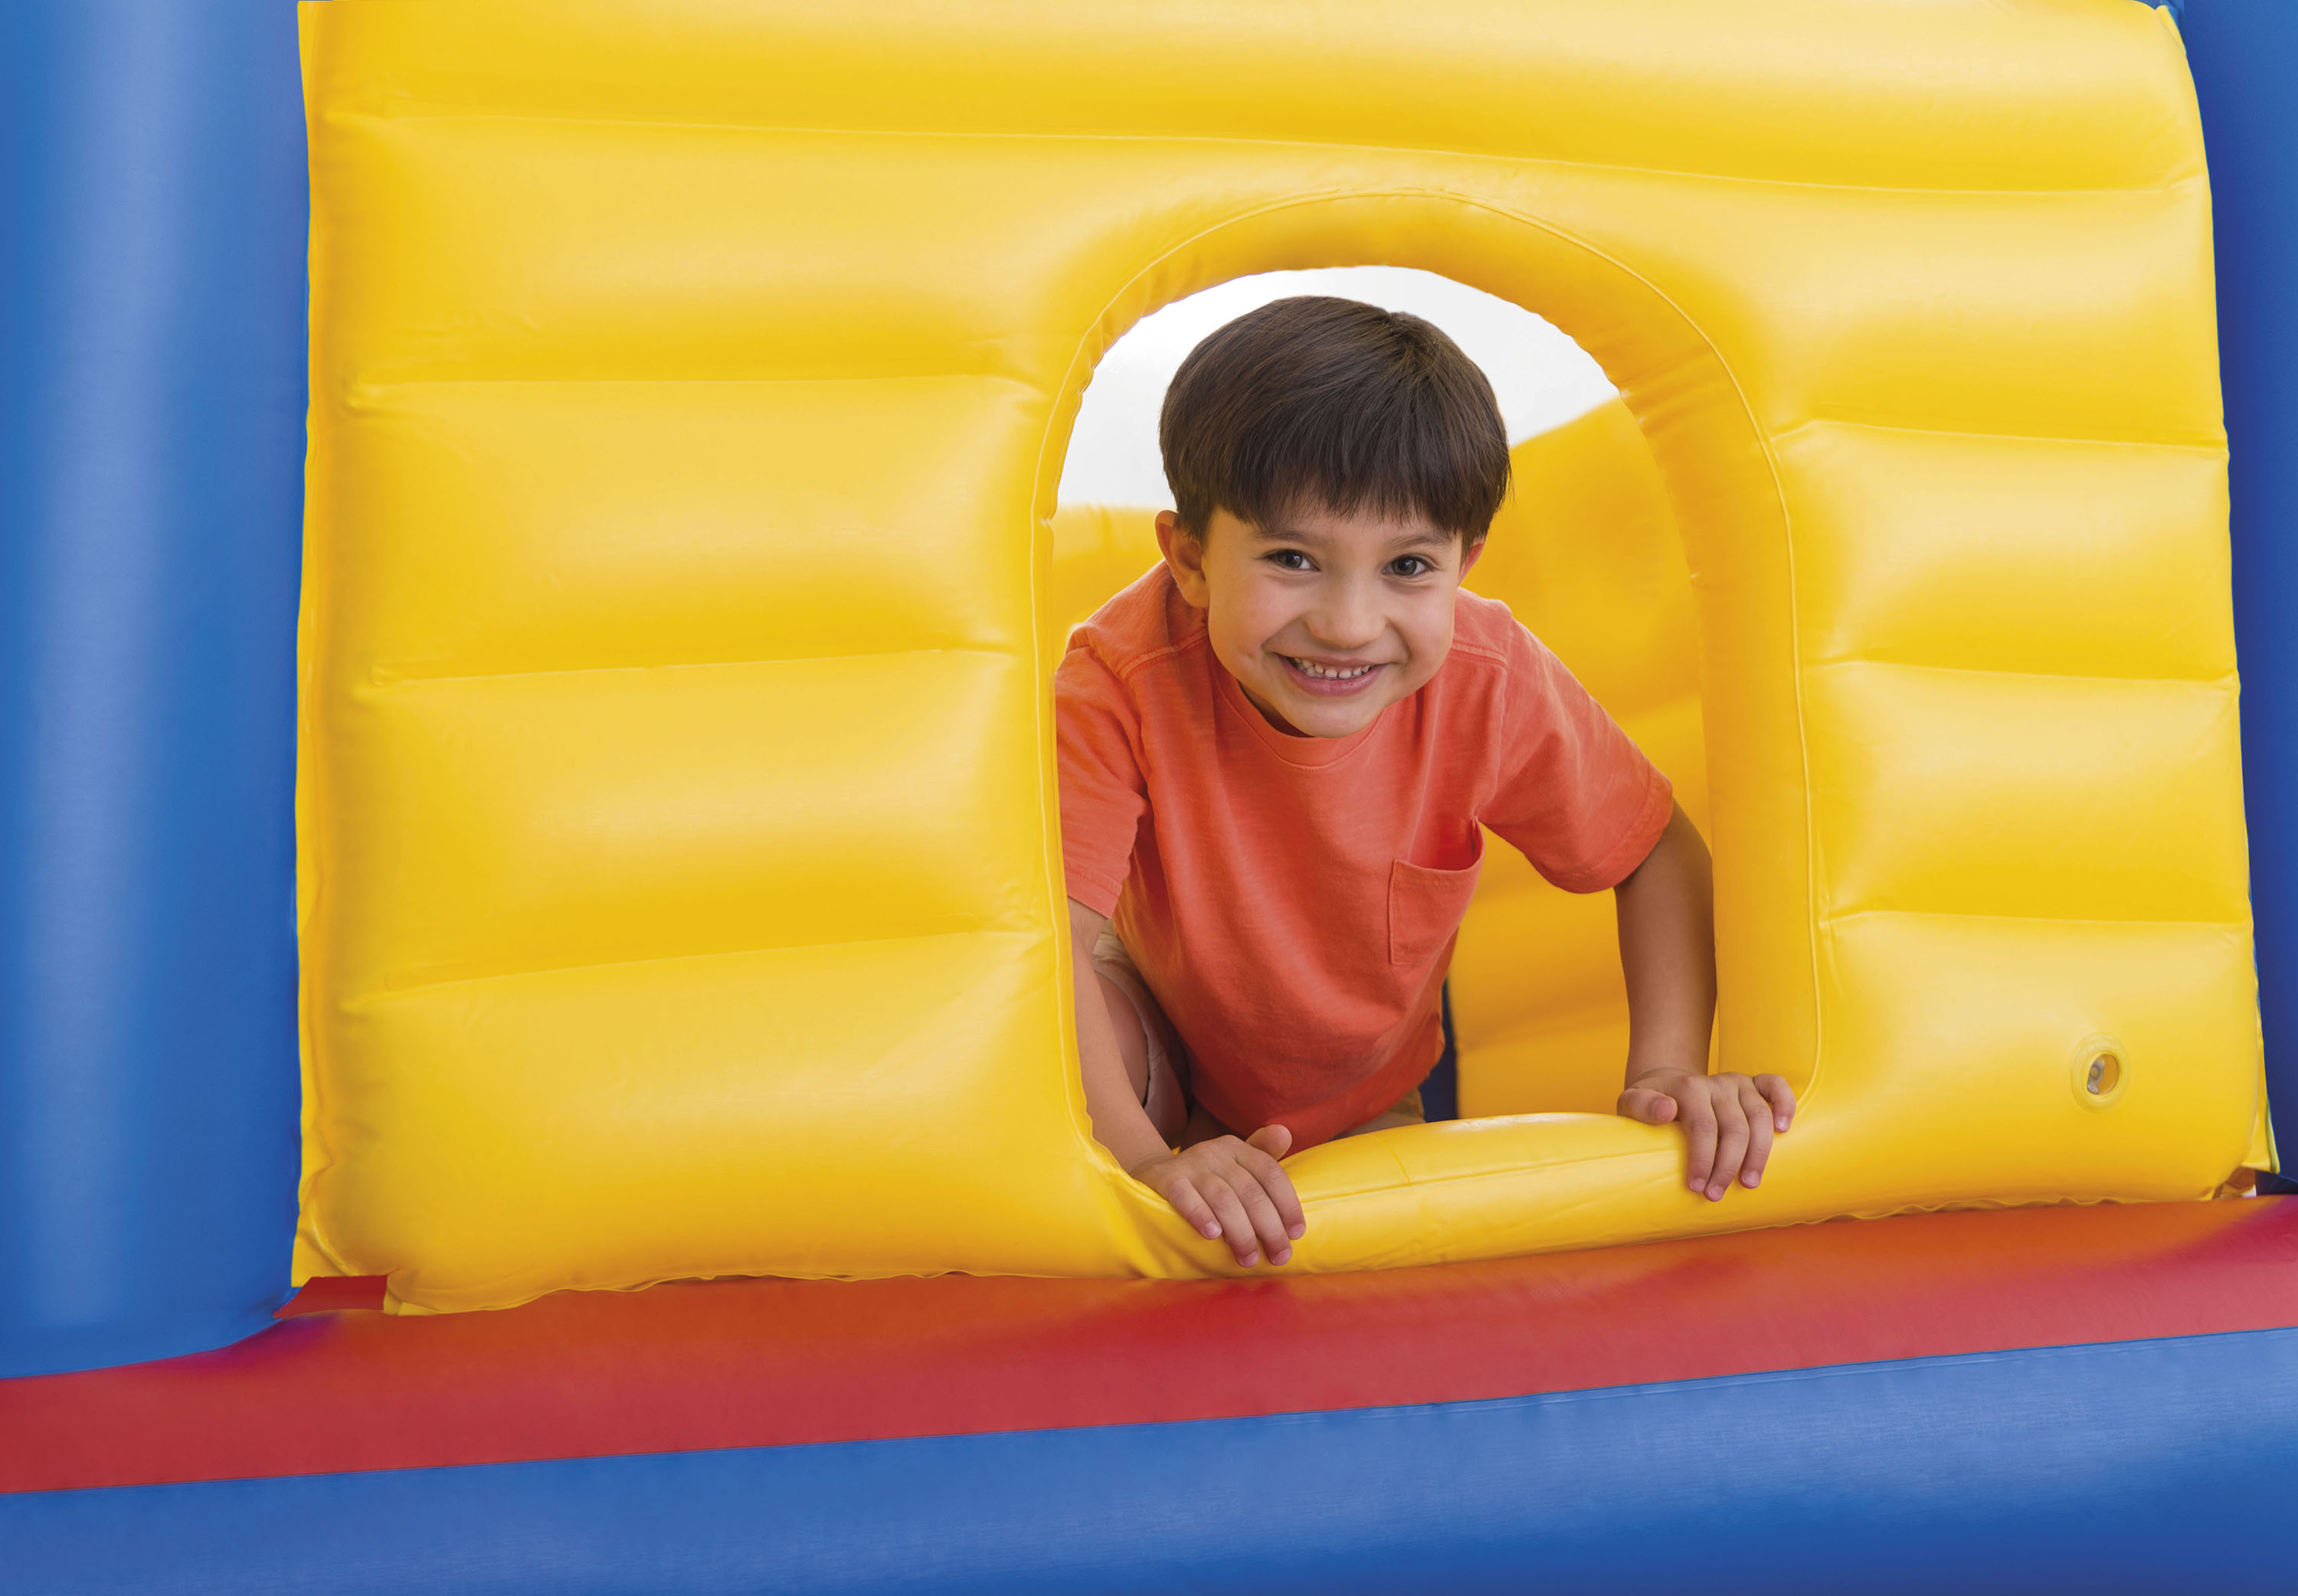 Intex Inflatable Colorful Jump-O-Lene Kids Ball Pit Castle Bouncer for Ages 3-6 - image 5 of 7